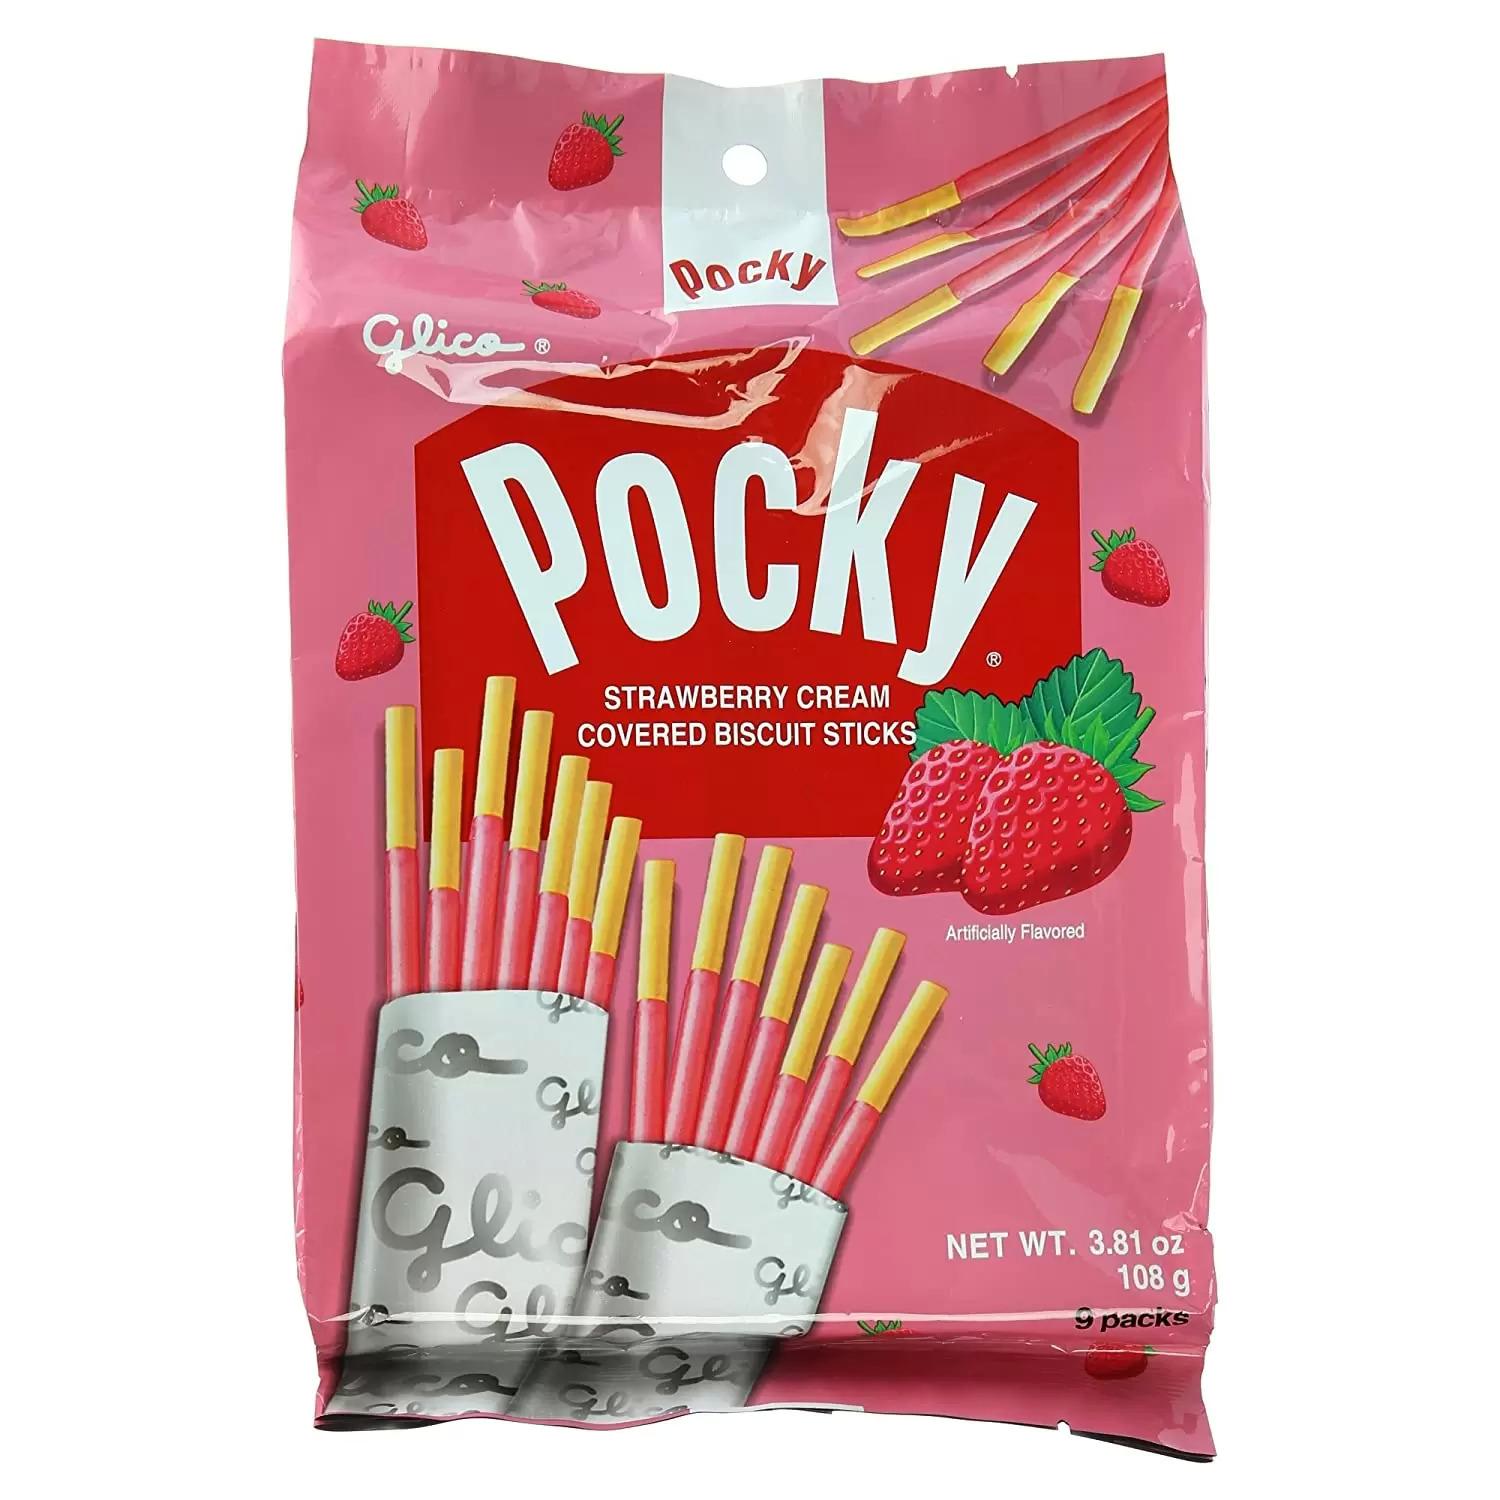 Glico Pocky Strawberry Cream Covered Biscuit Sticks for $3.69 Shipped